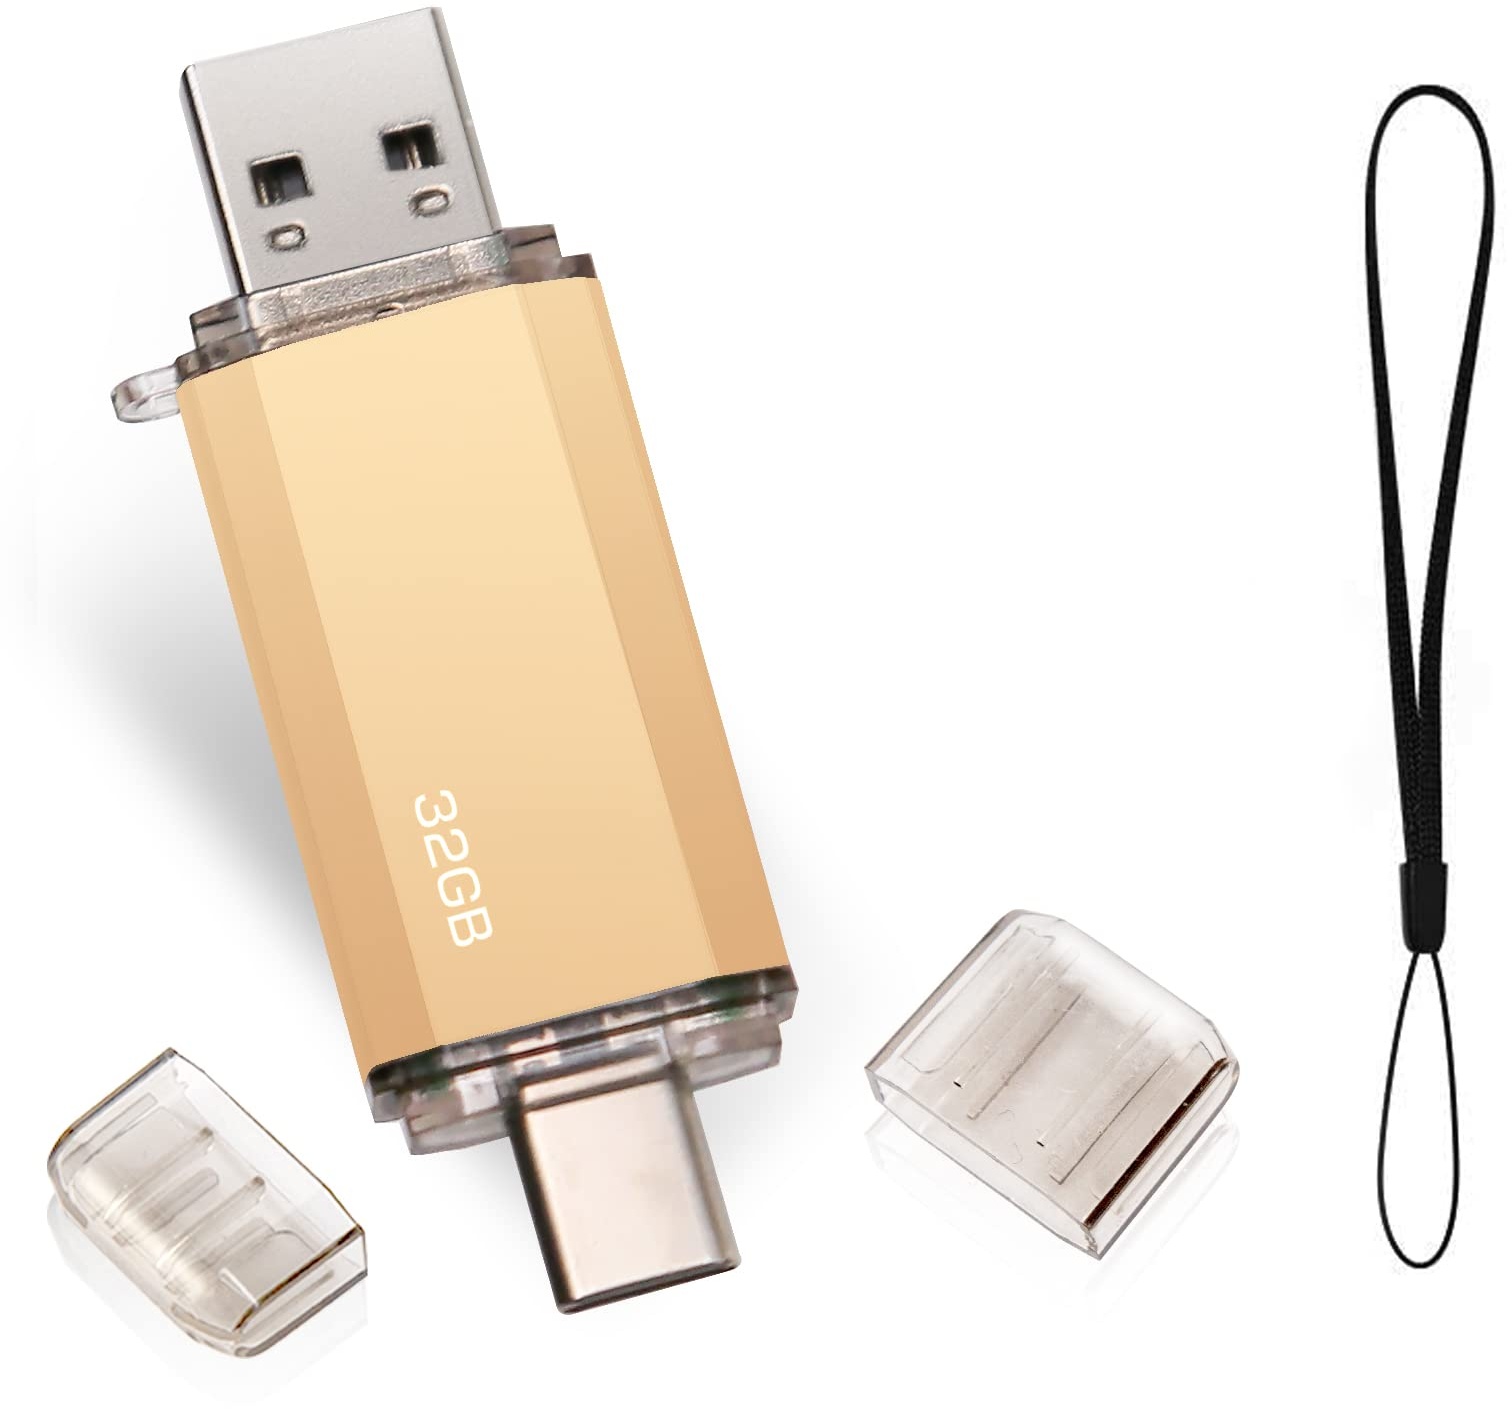 Type C USB Stick 32 GB, OTG USB C Memory Stick 32 GB 2-in-1 Type C Flash Drive 32 GB Mini Memory Stick External Pen Drive for MacBook Pro, Android Mobile Phone, Pad, Laptop and Computer (Gold)